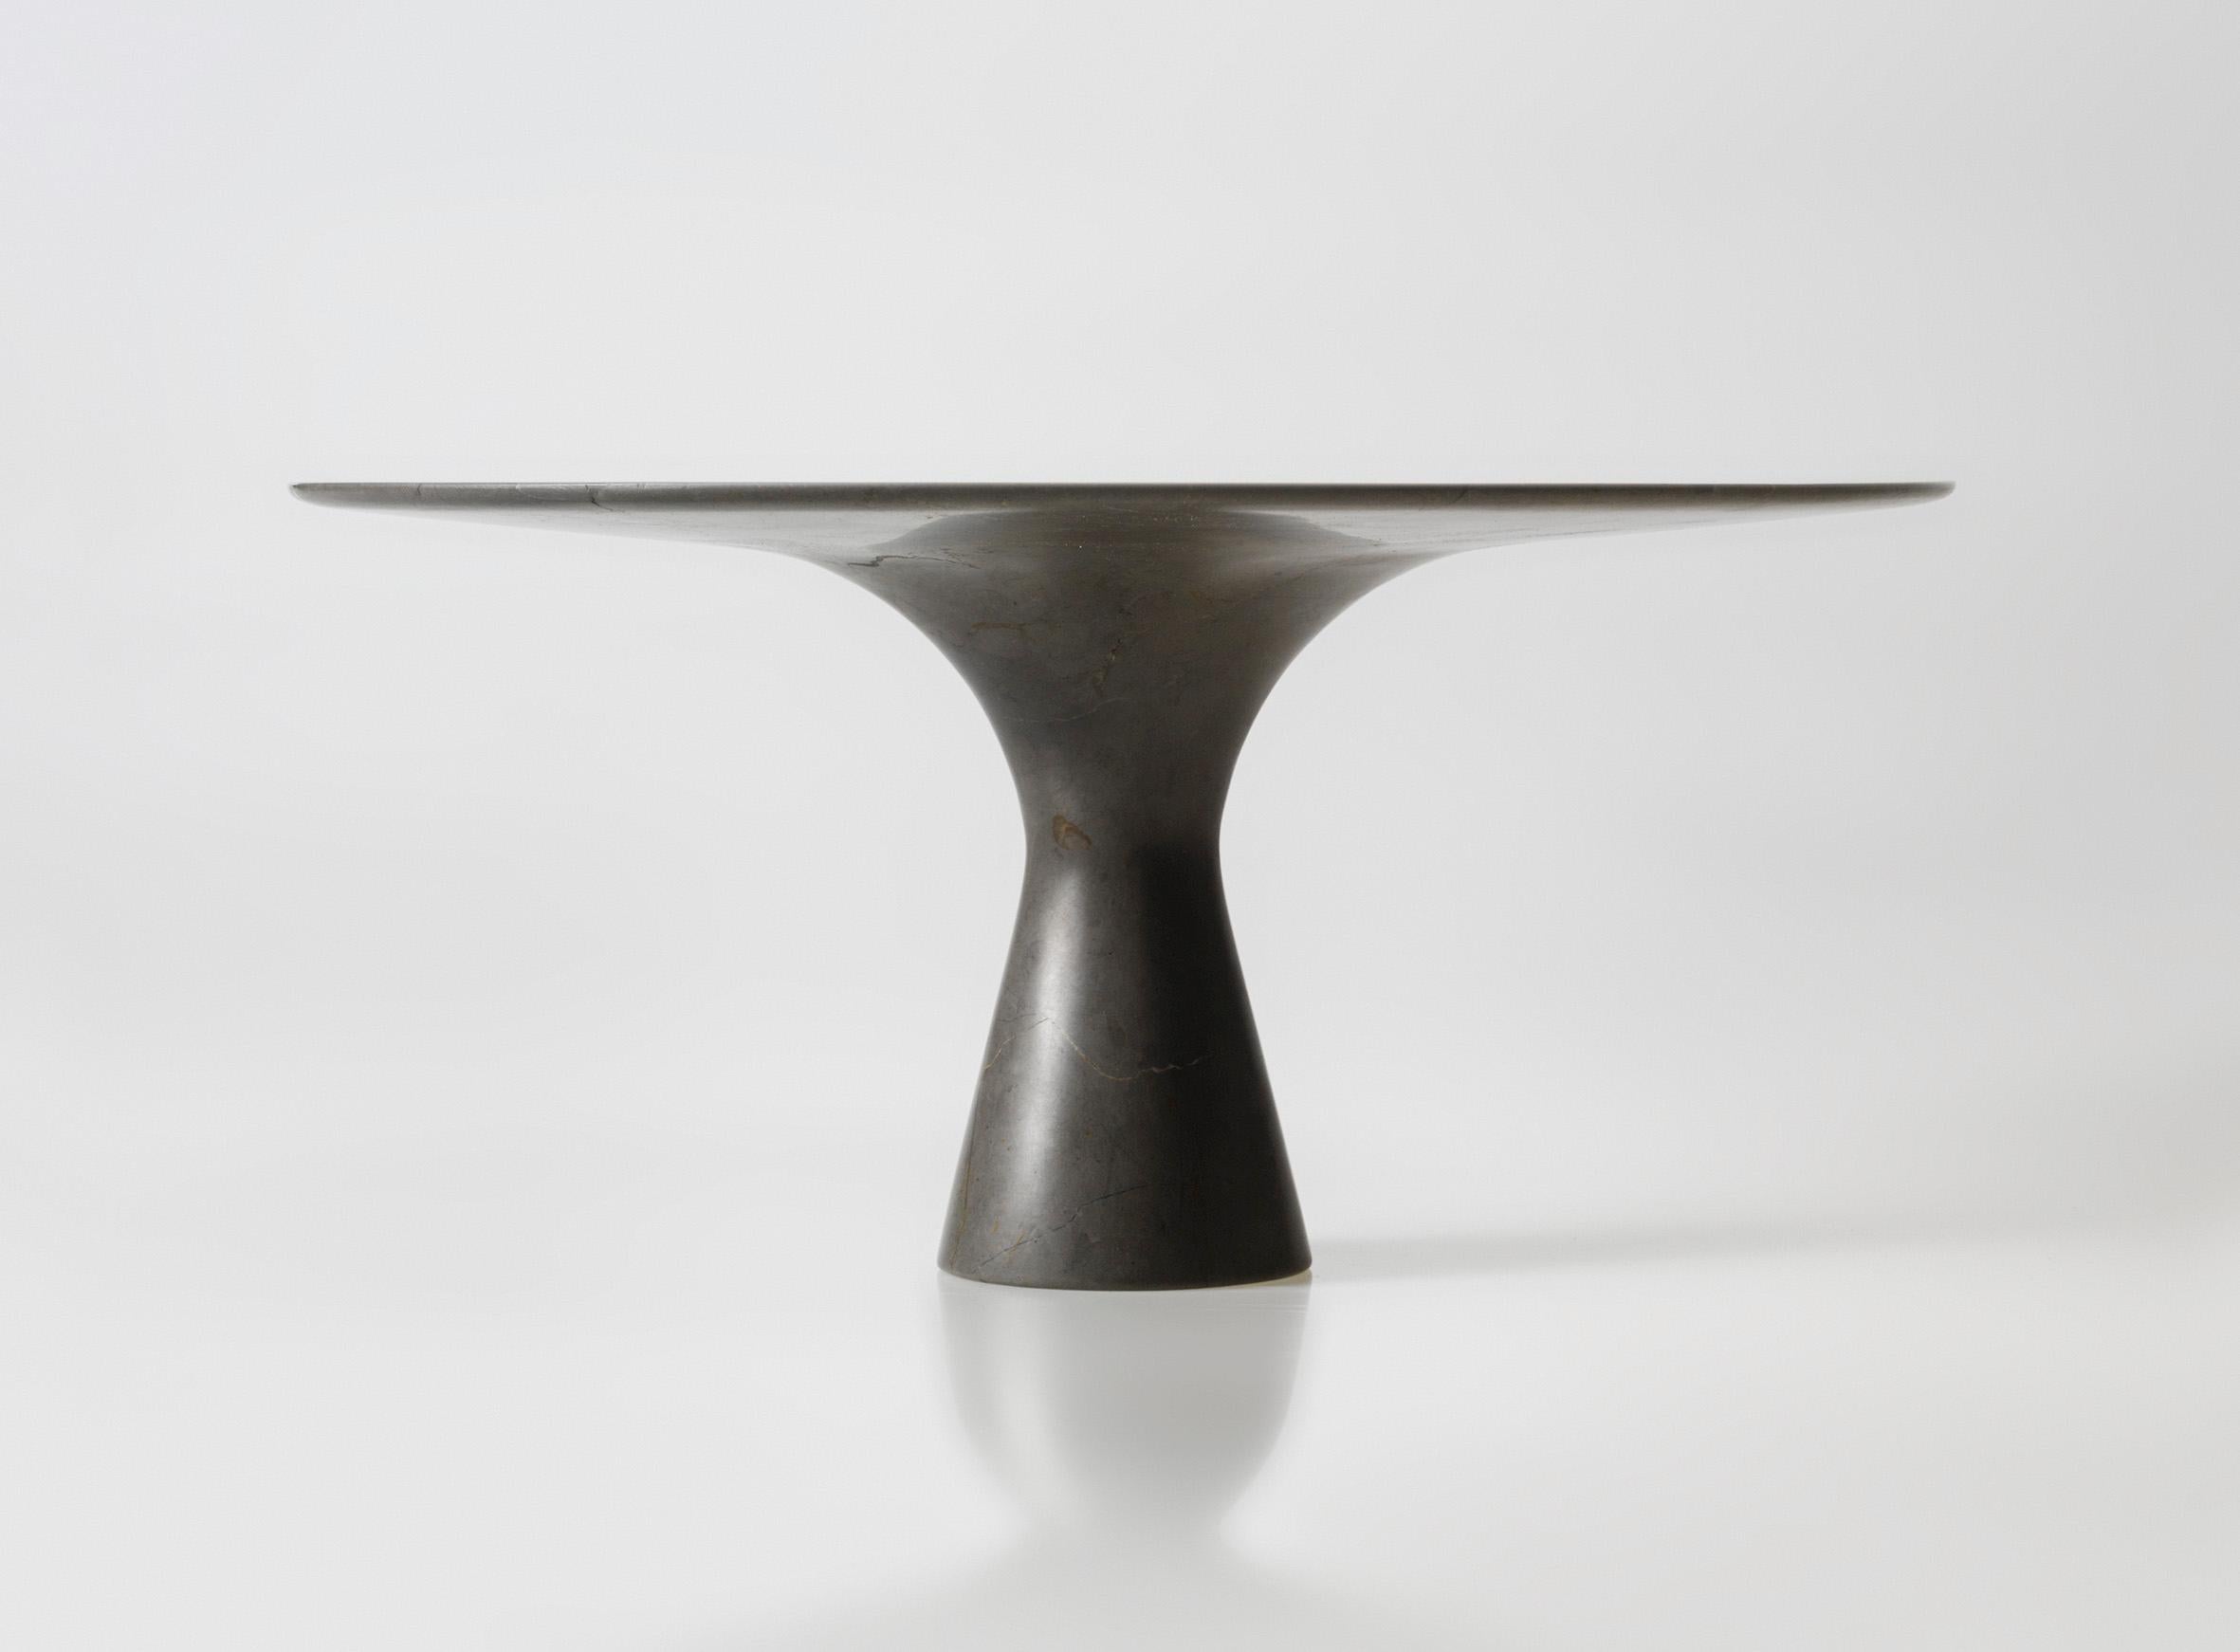 Grafite Refined Contemporary marble dining table 180/75
Dimensions: 180 x 75 cm
Materials: Grafite

Angelo is the essence of a round table in natural stone, a sculptural shape in robust material with elegant lines and refined finishes.

The